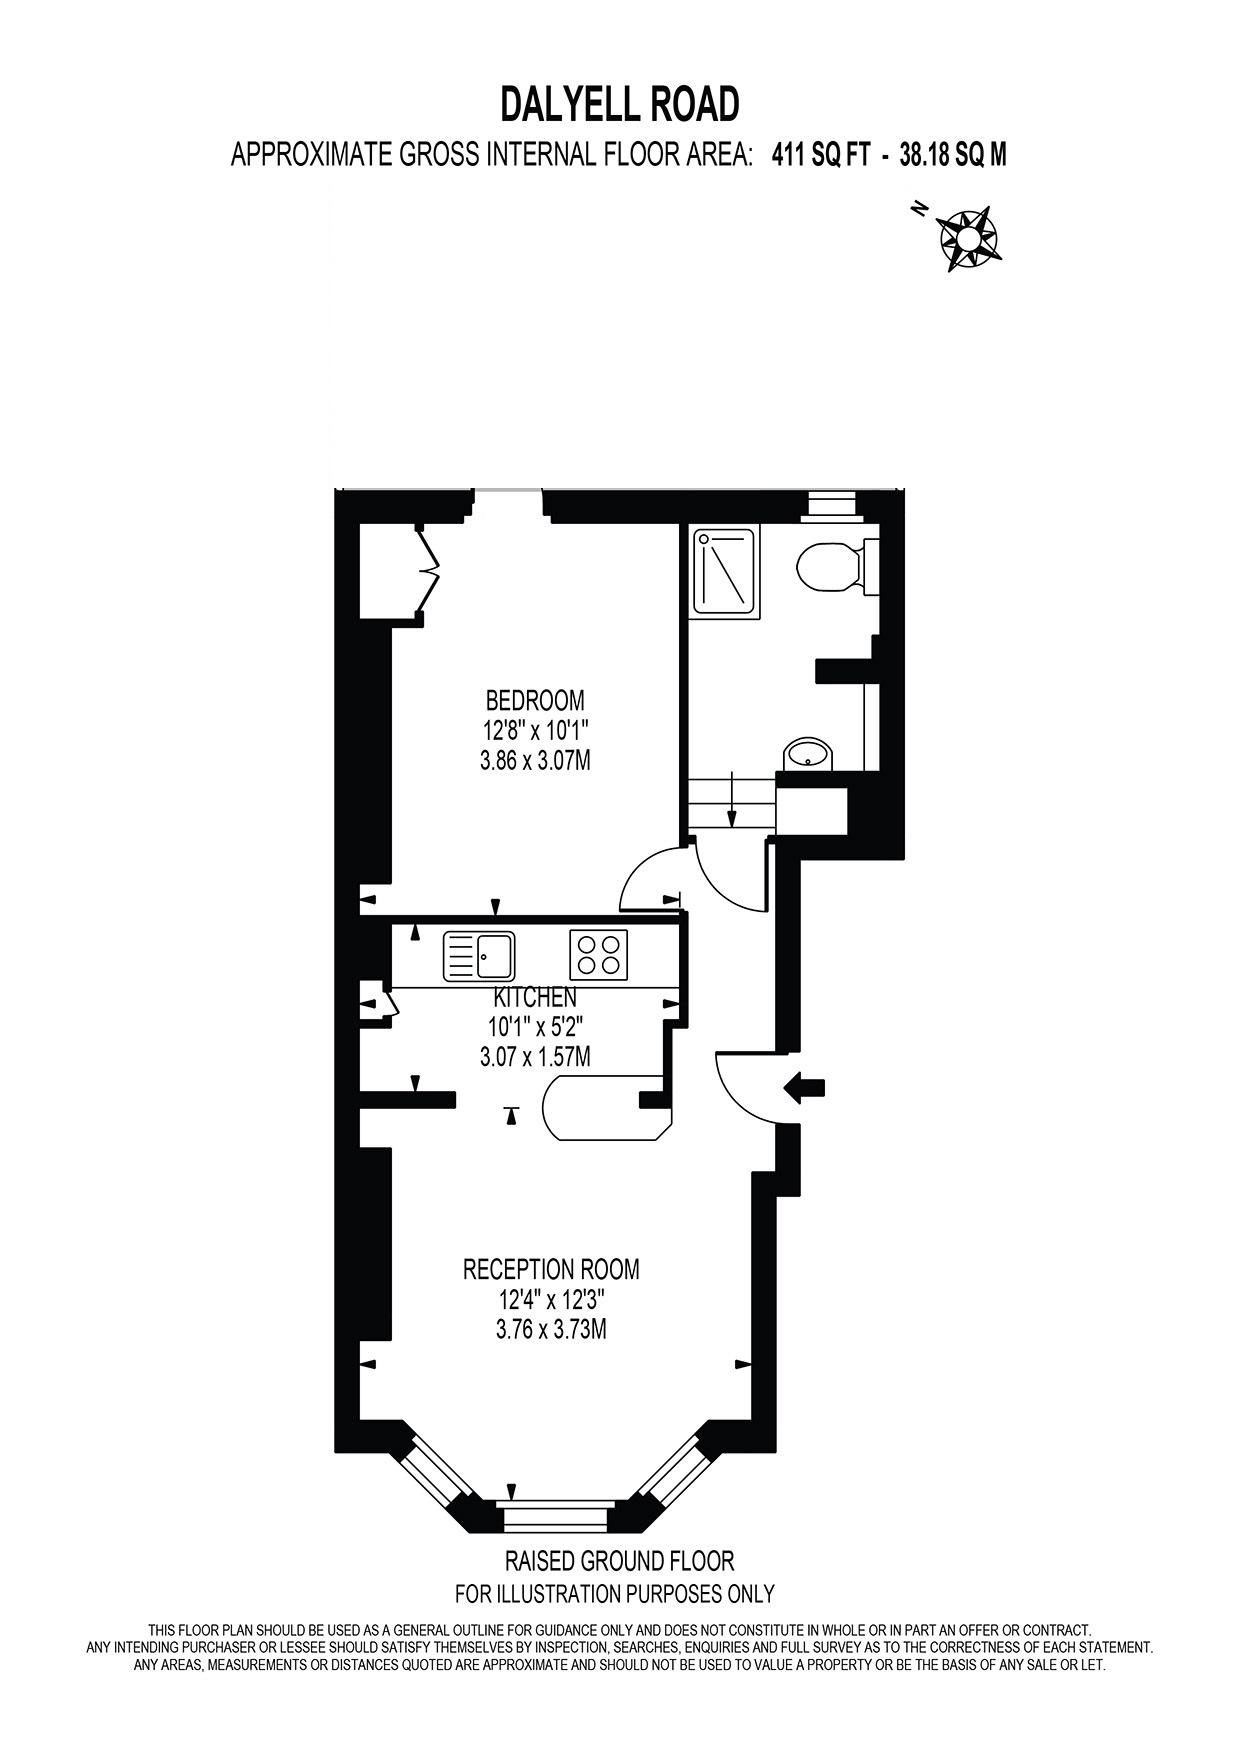 1 bed for sale in Brixton, London - Property Floorplan